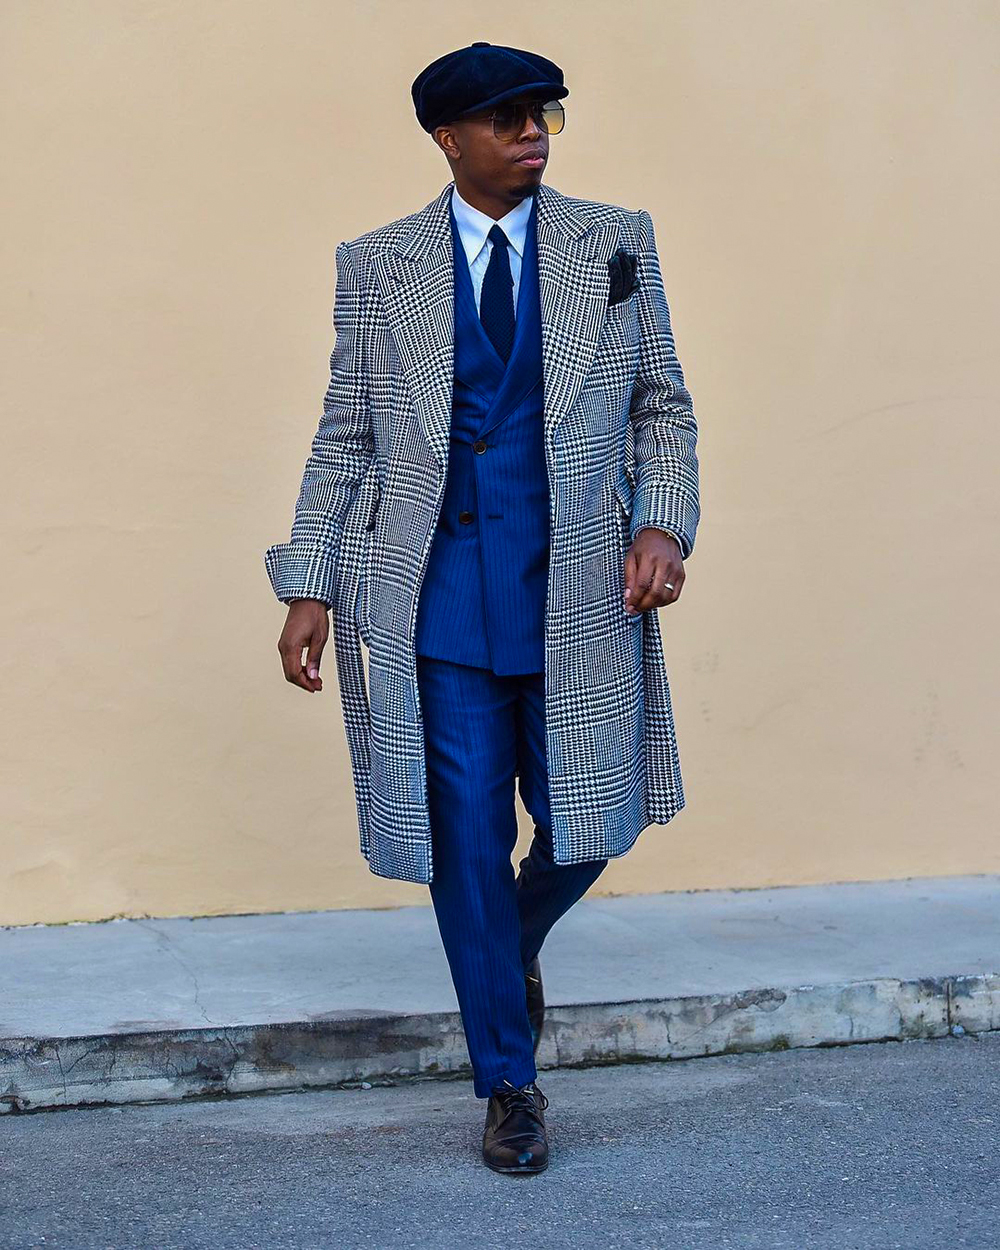 Gray herringbone overcoat, blue suit, white dress shirt, black derby shoes outfit